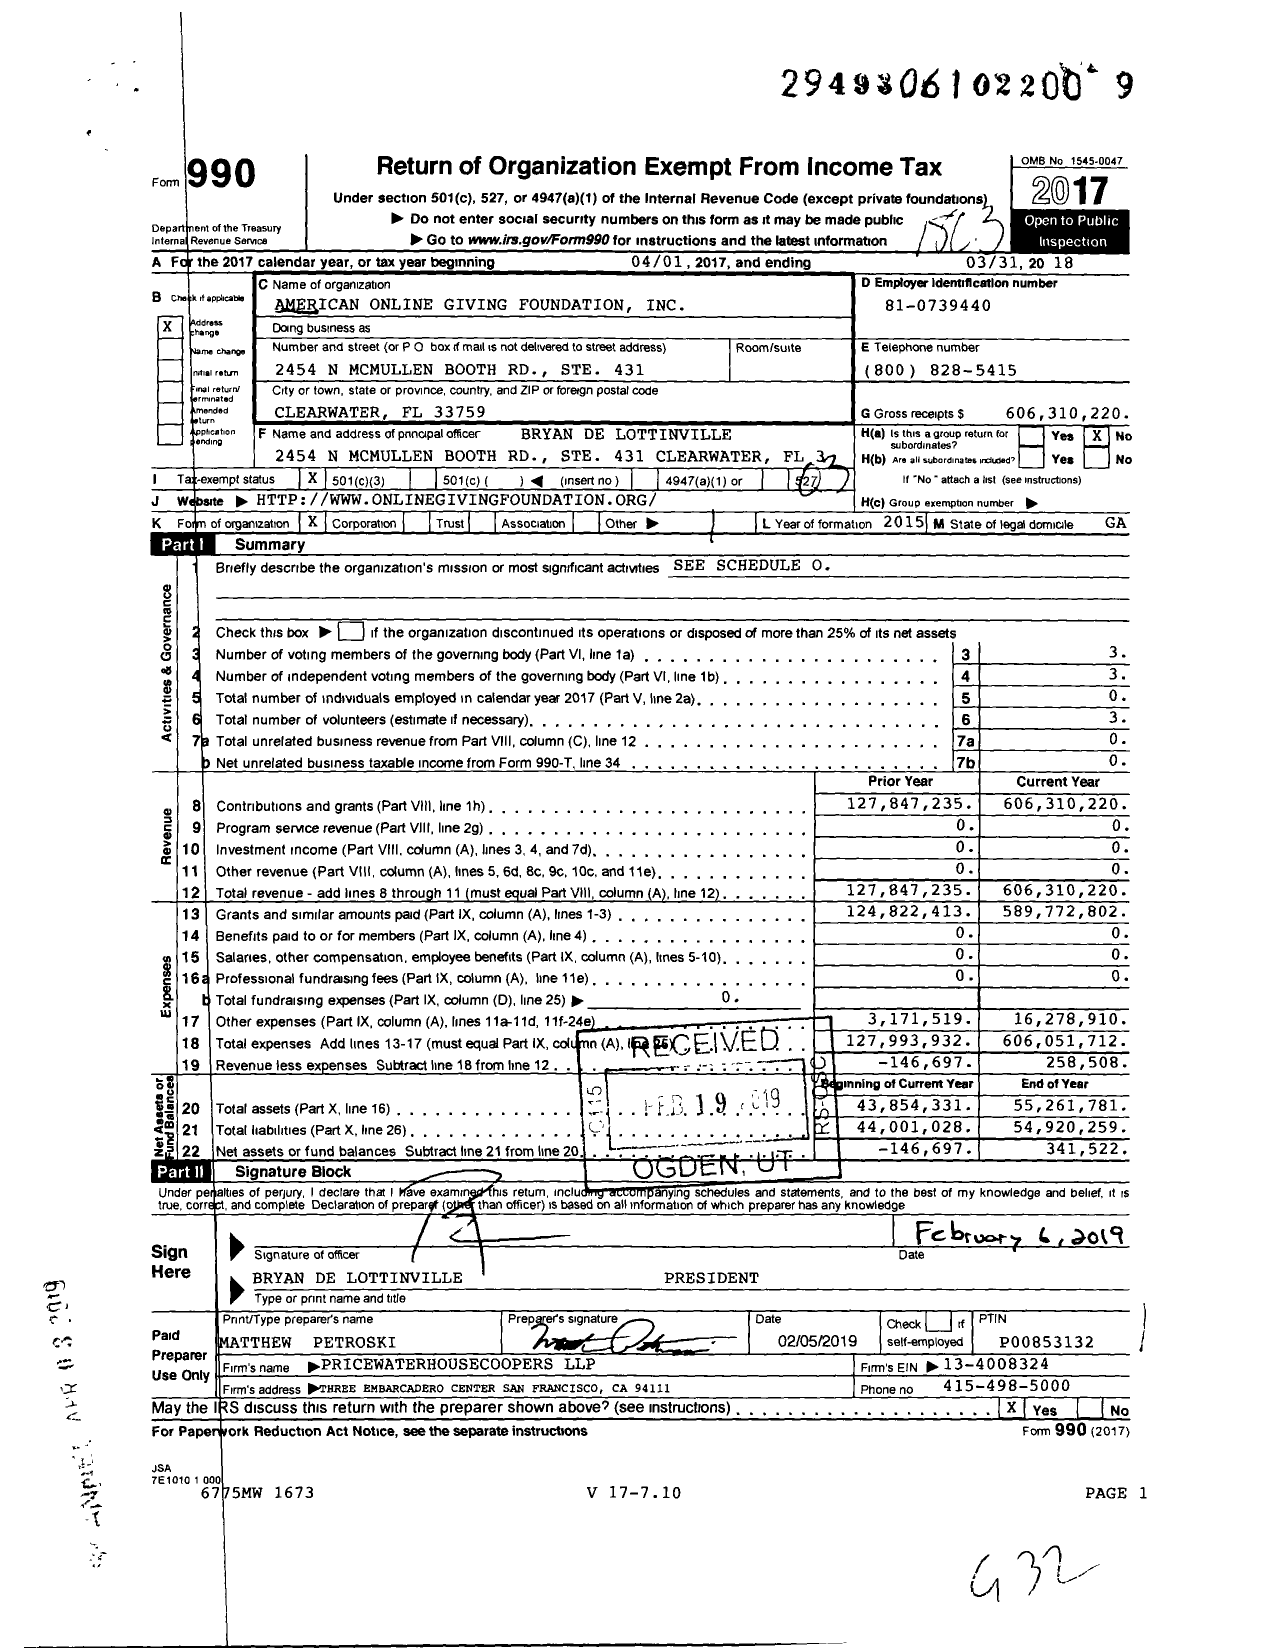 Image of first page of 2017 Form 990 for American Online Giving Foundation